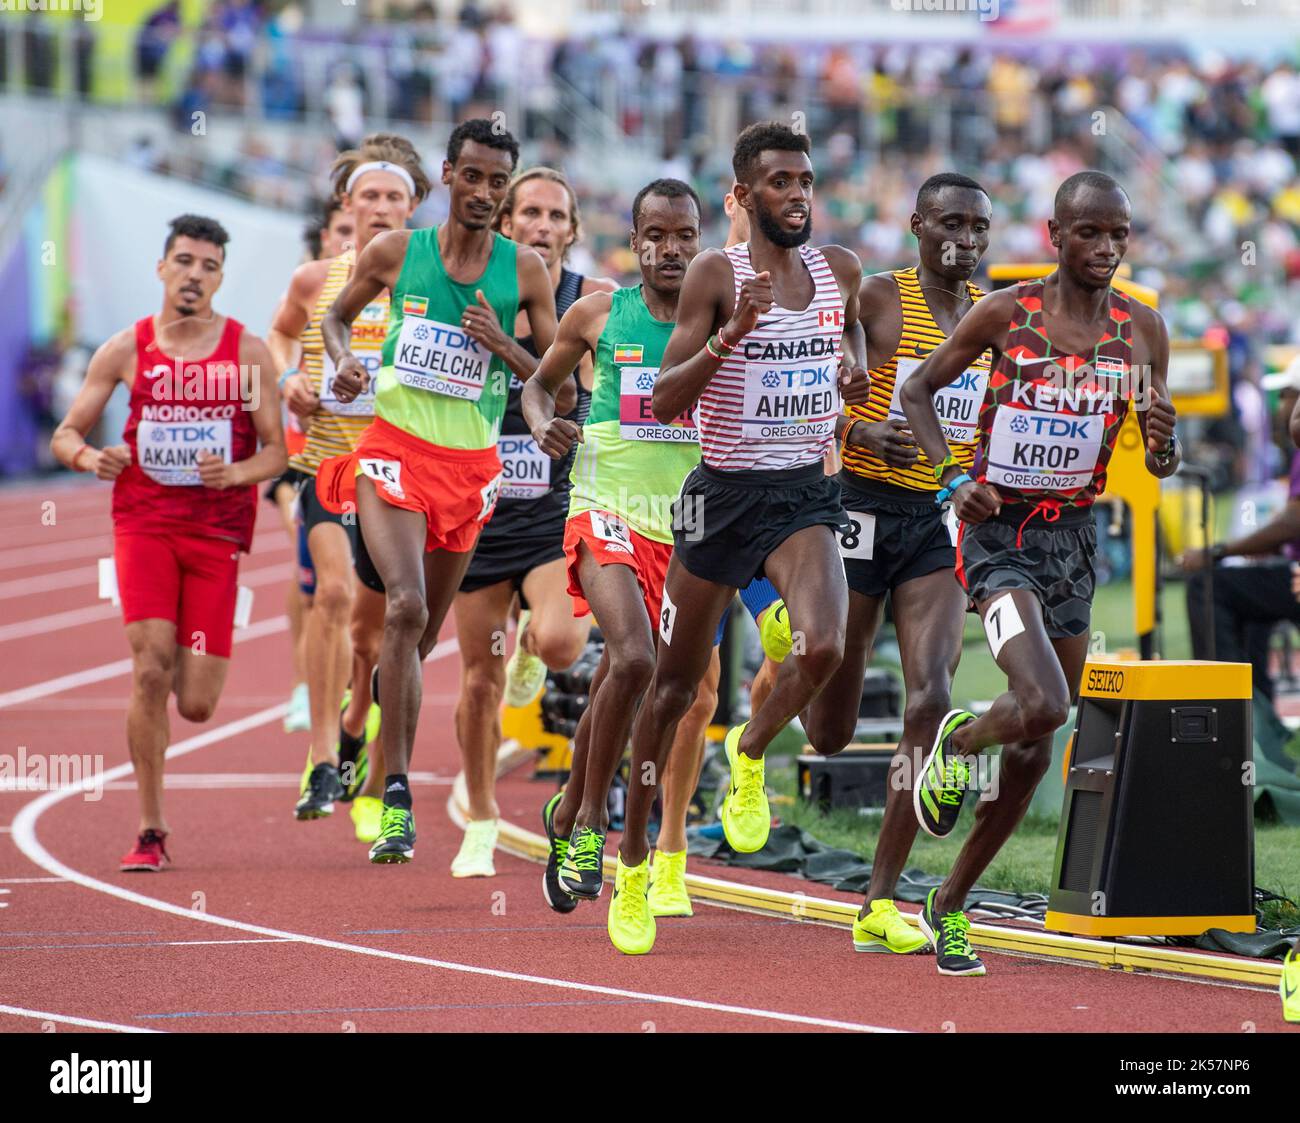 Mohammed Ahmed of Canada competing in the men’s 5000m heats at the World Athletics Championships, Hayward Field, Eugene, Oregon USA on the 21st July 2 Stock Photo